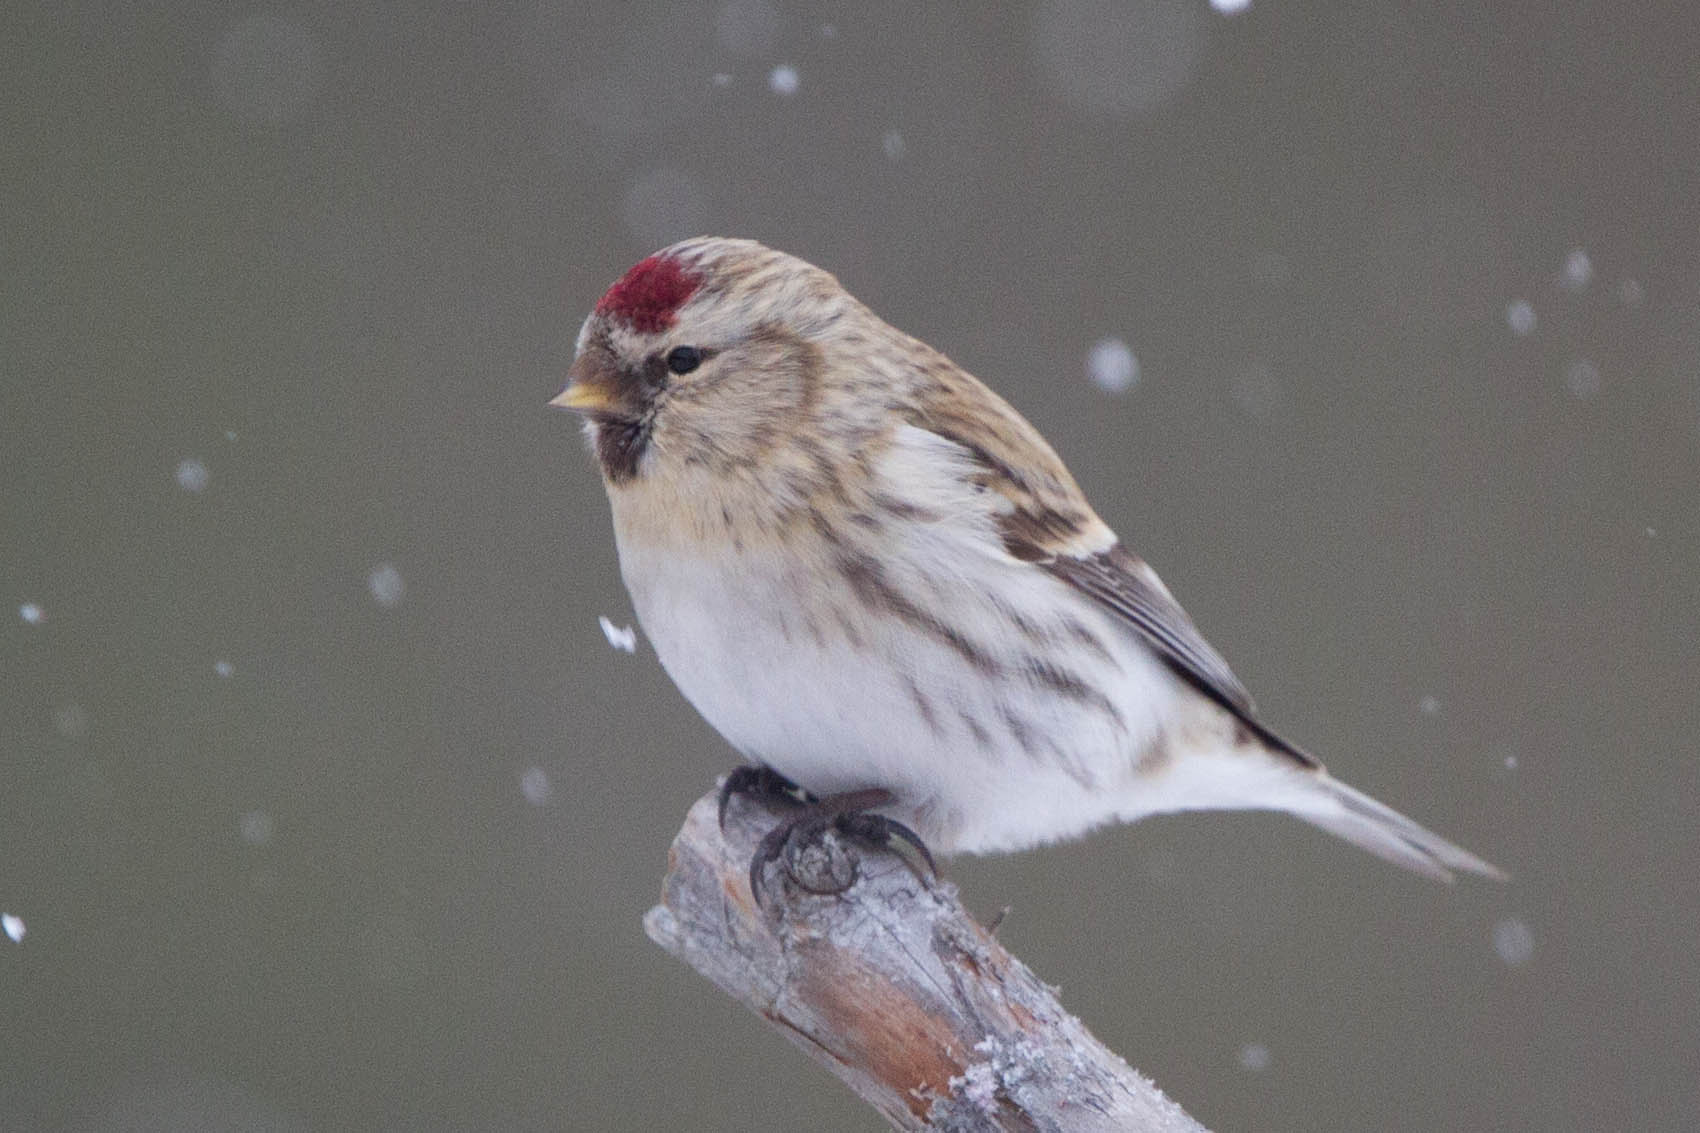 Arctic Redpoll is not uncommon. Breeds in arctic tundra scrub such as dwarf willows, birches, etc.